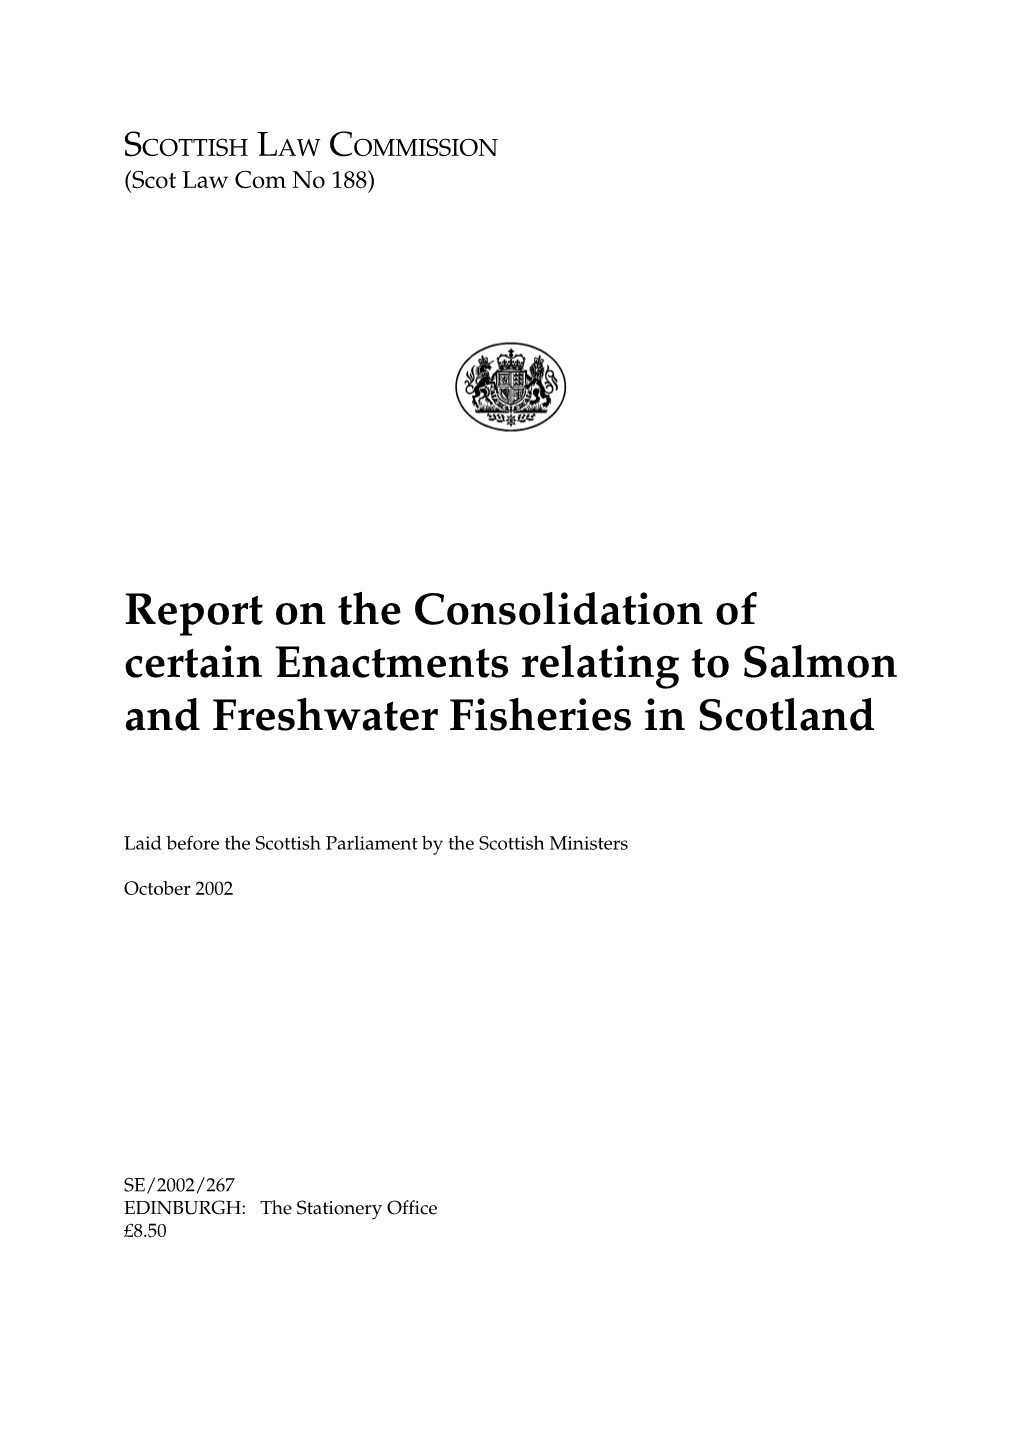 Report on the Consolidation of Certain Enactments Relating to Salmon and Freshwater Fisheries in Scotland